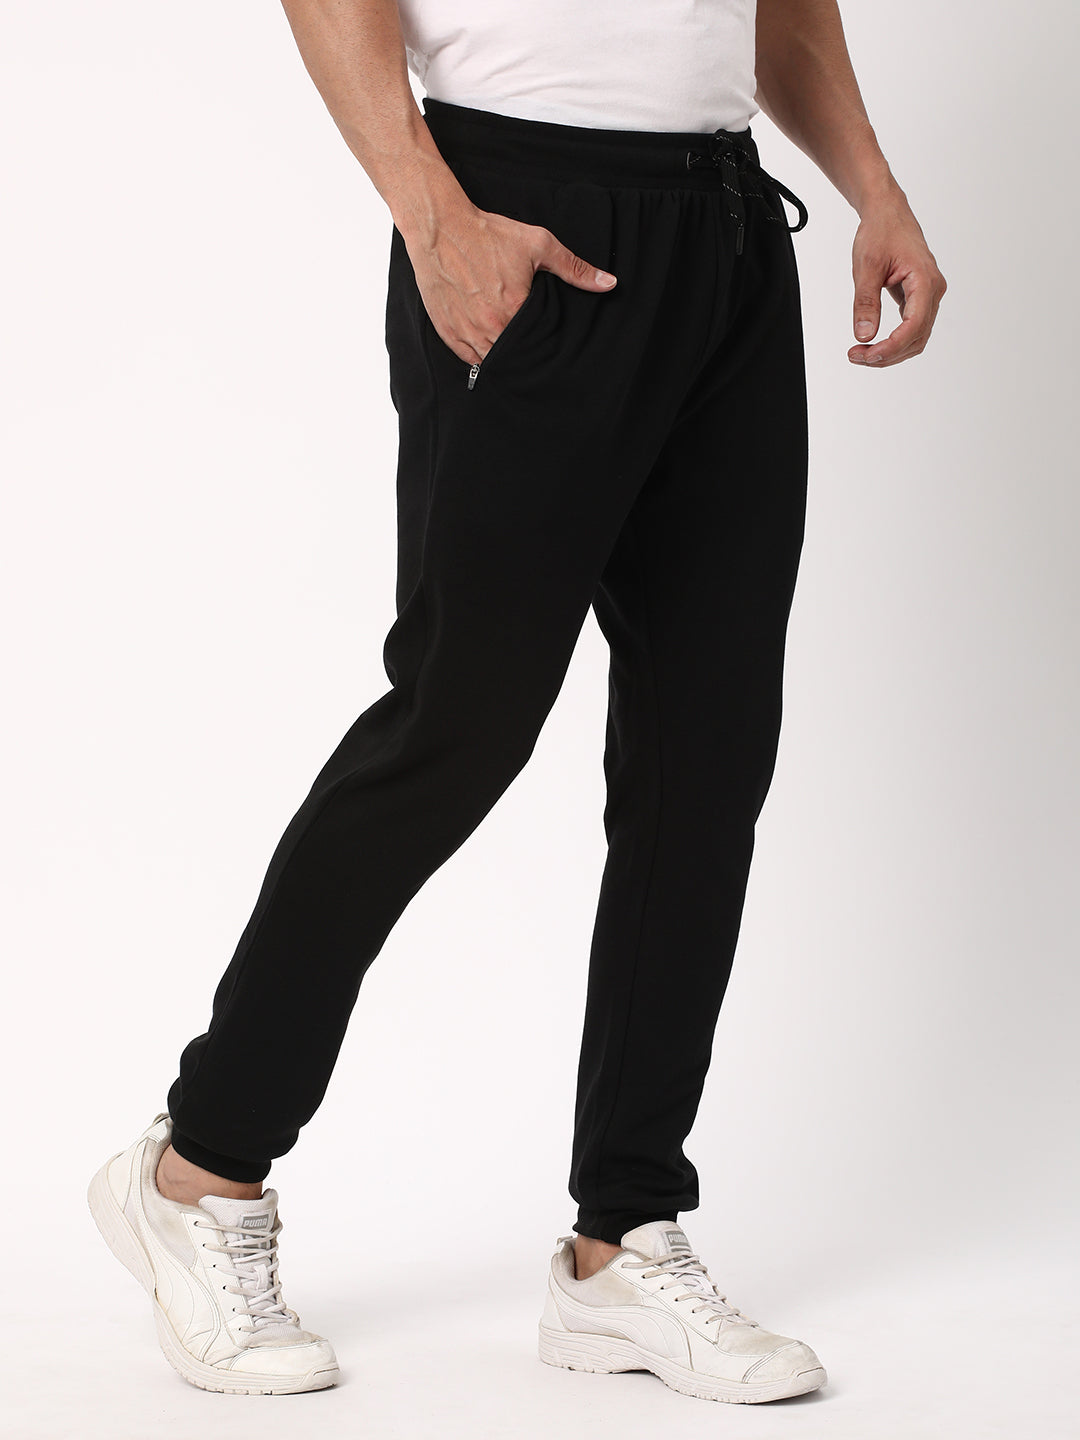 Cotstyle Men's Super Combed Cotton Slim-Fit Casual Joggers with Zipper Pockets - Black, Style no.JR1200